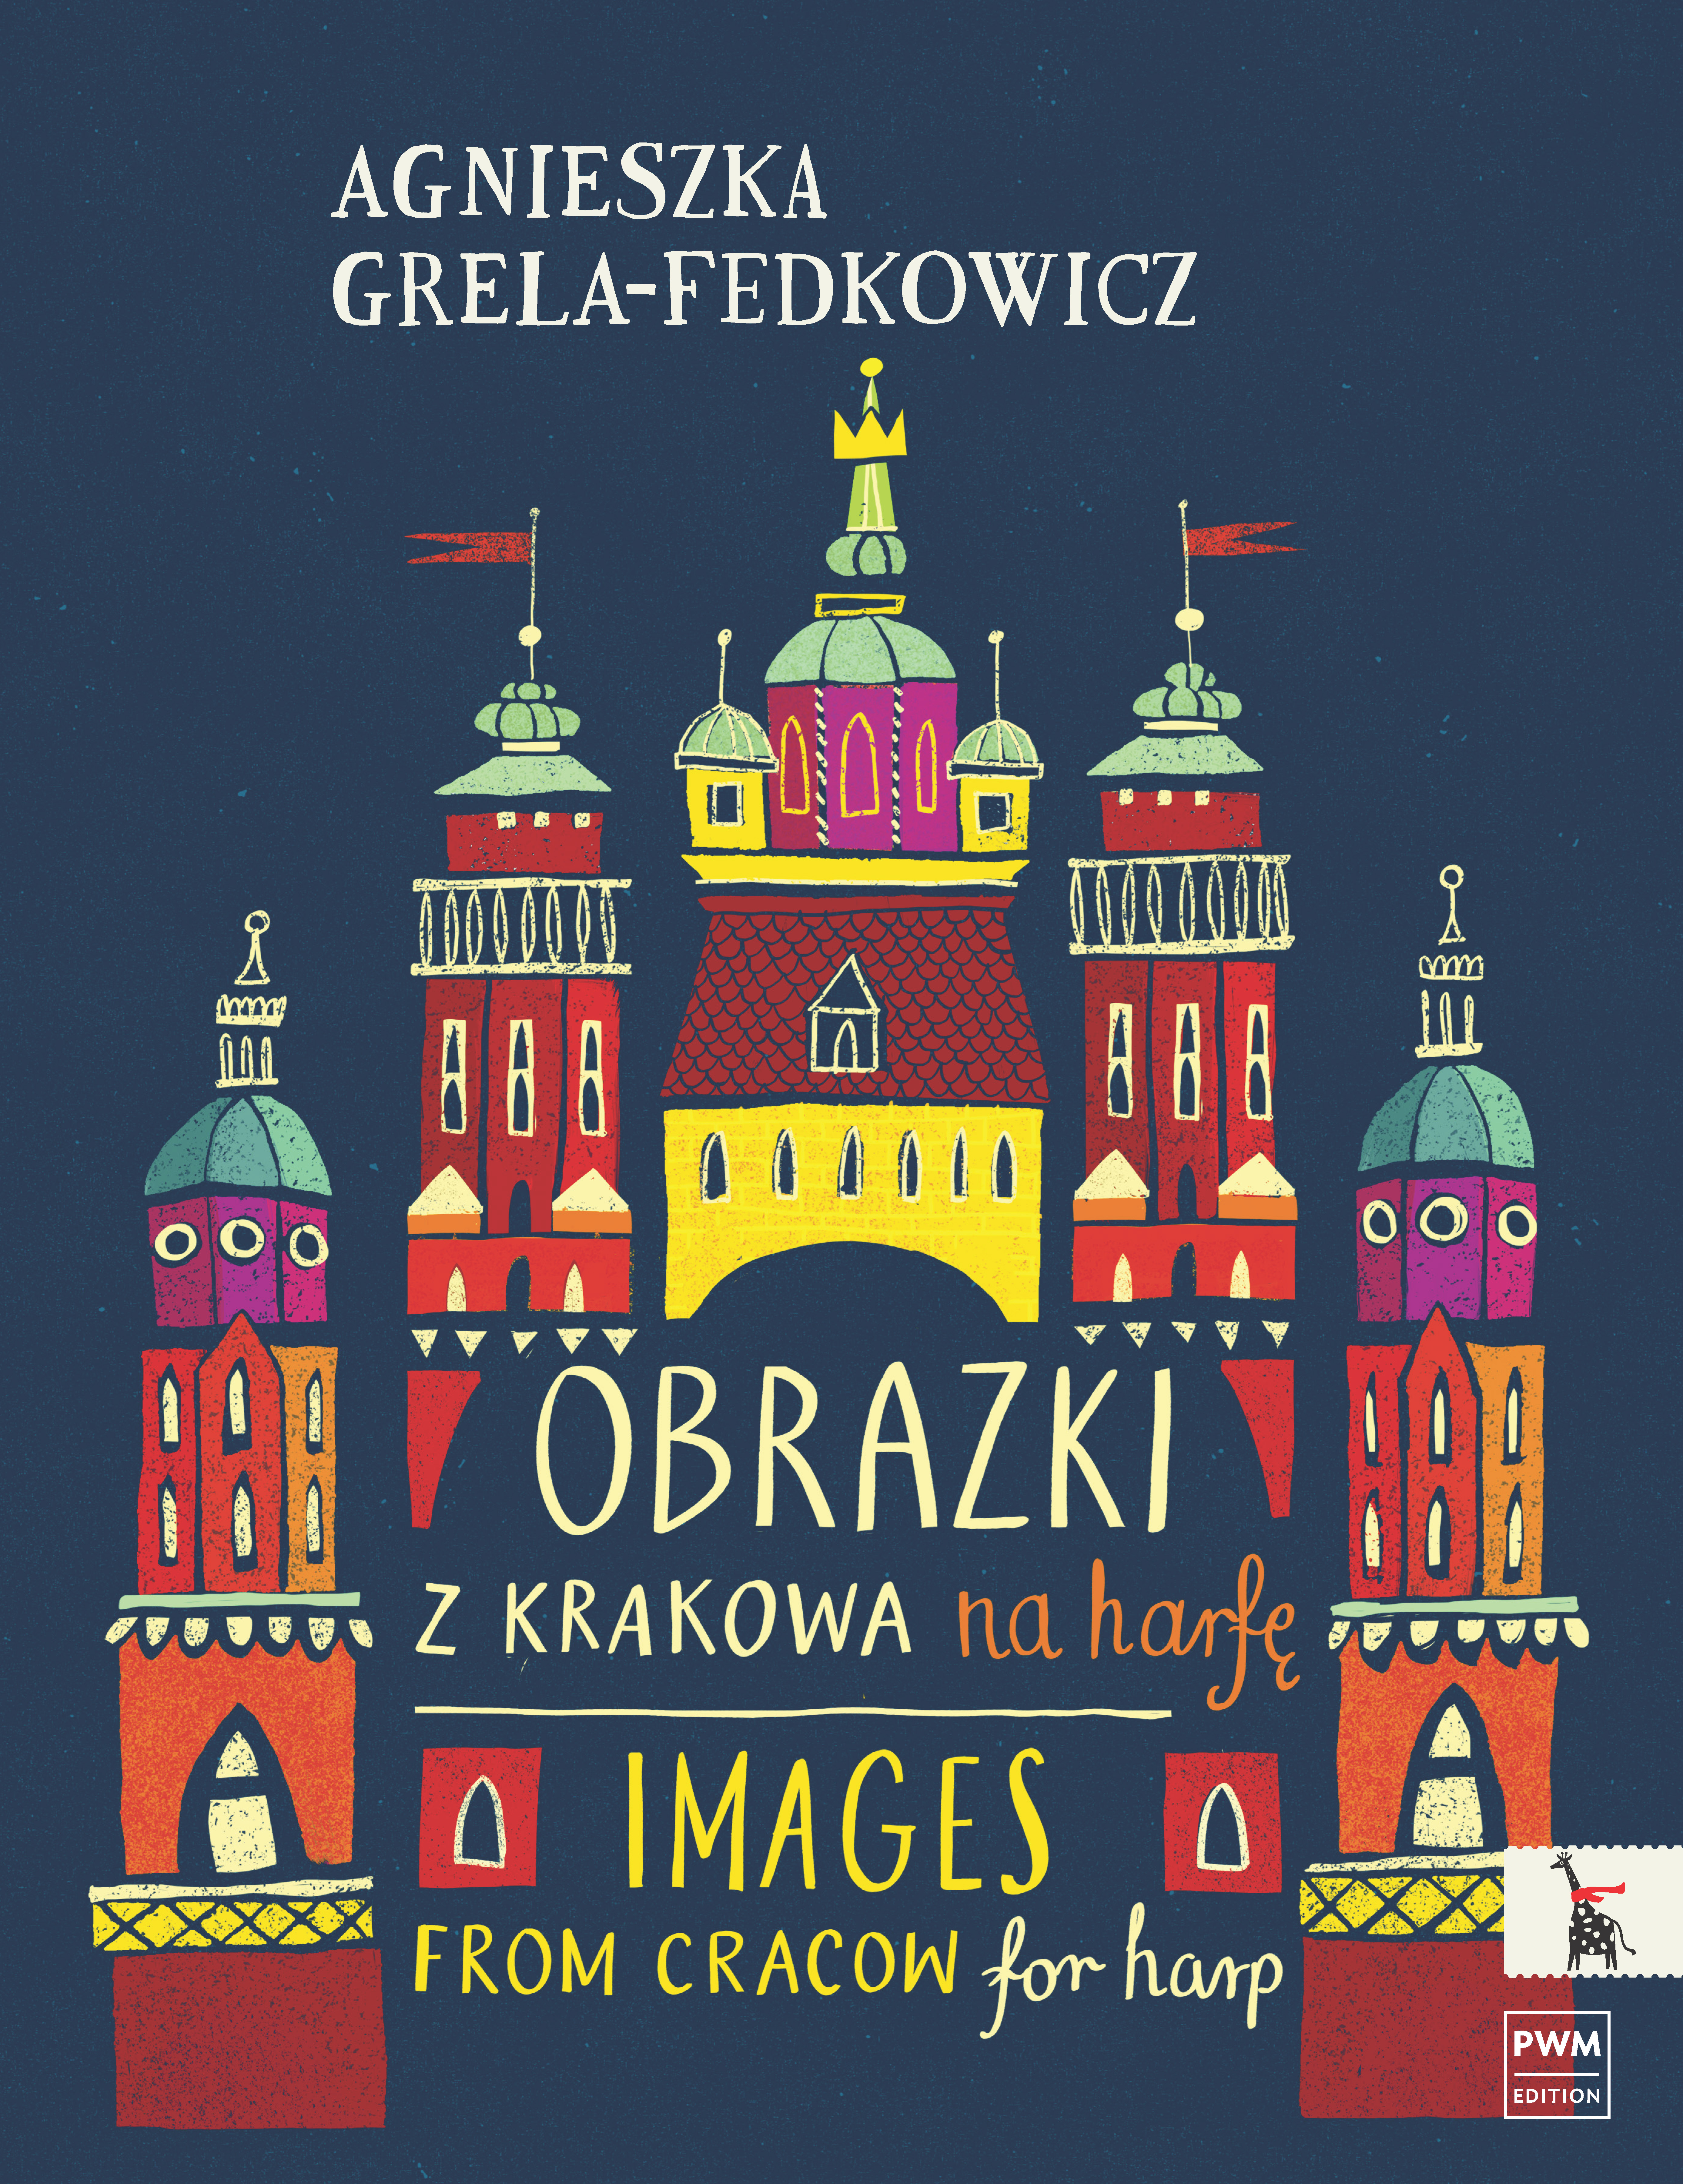 Grela-fedkowicz Images From Cracow Harp Sheet Music Songbook